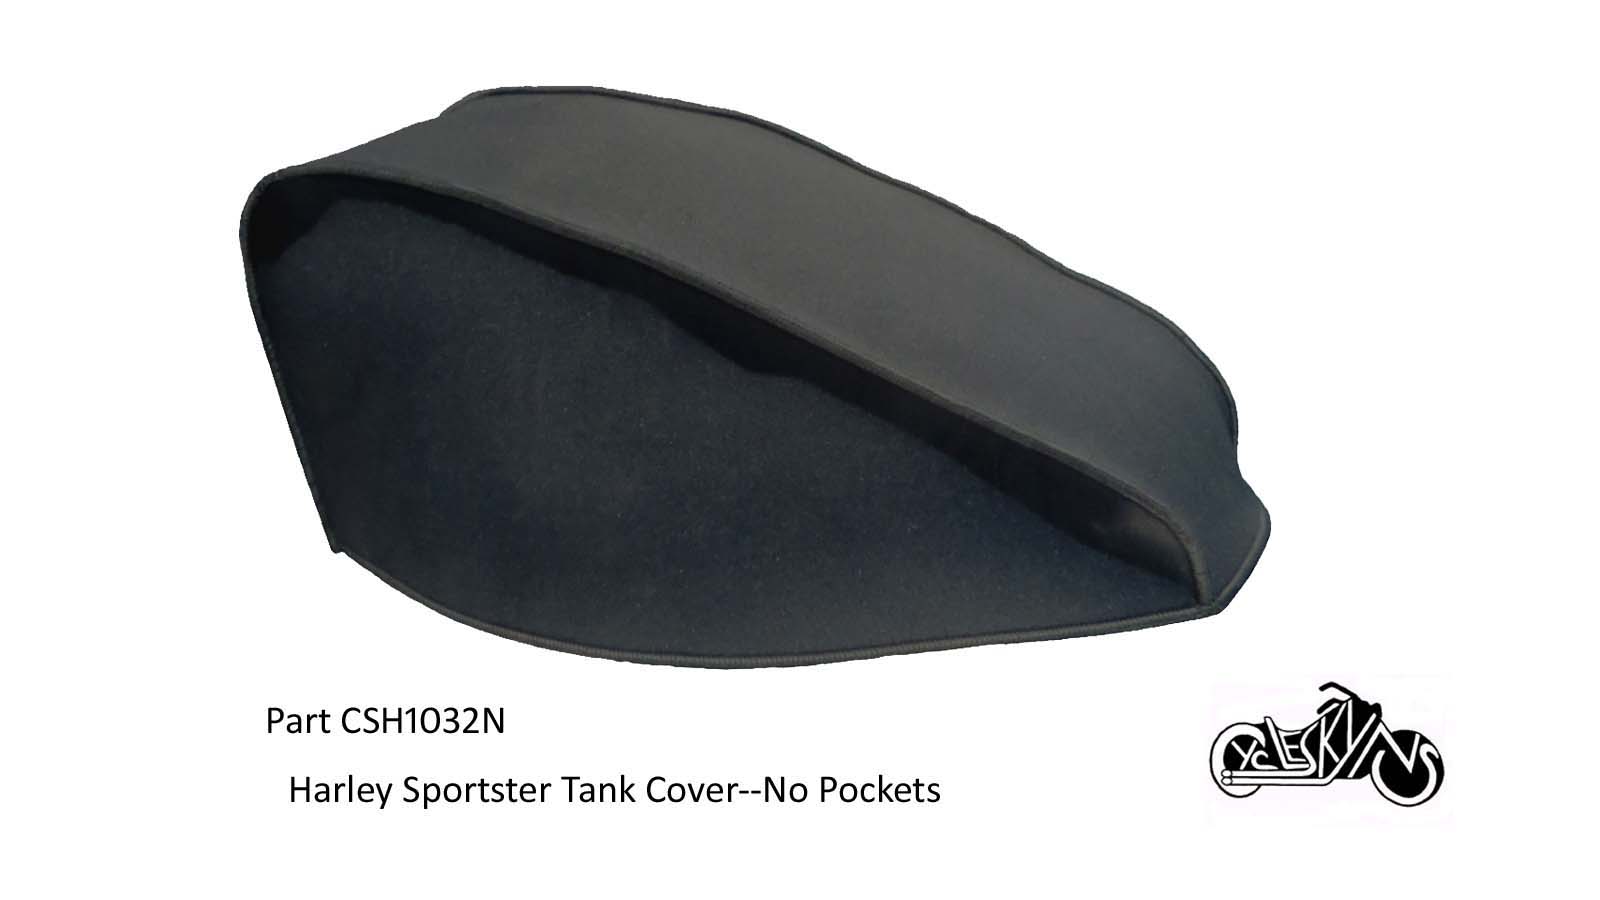 Neoprene Protective mechanic's Cover designed for the original 3.2 gallon Sportster Harley Davidson gas tank without top or side pockets